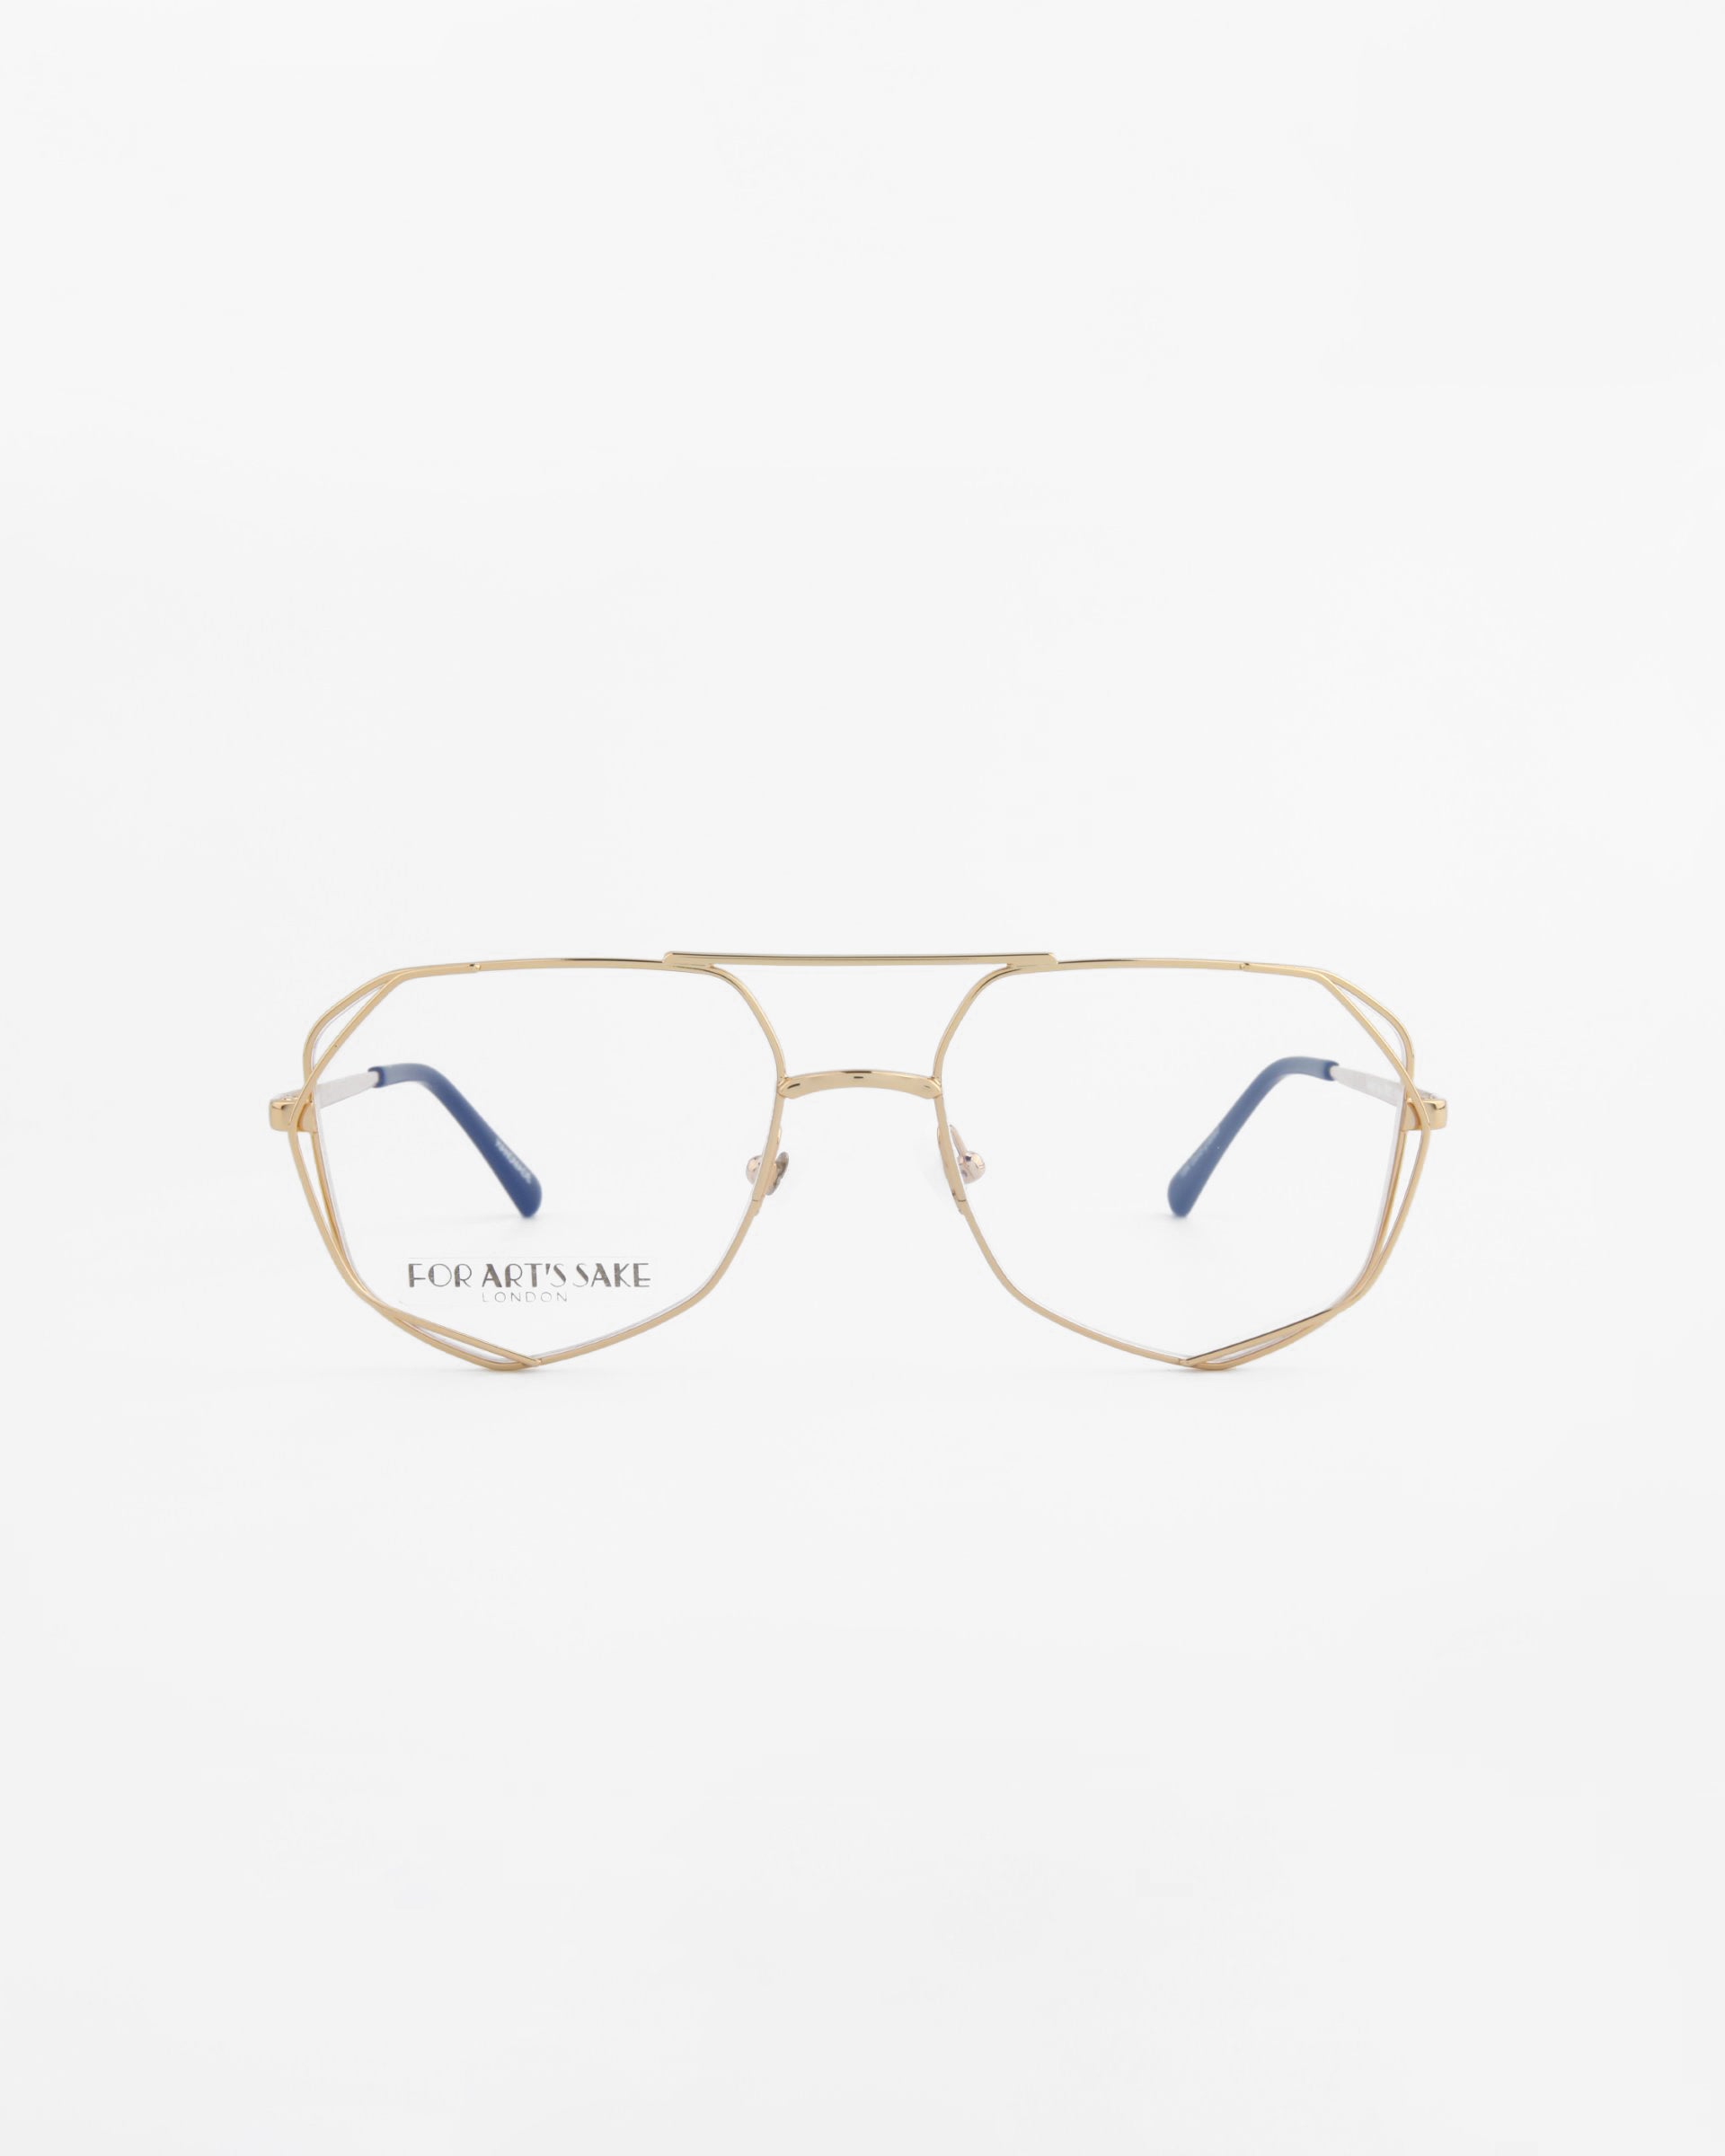 A pair of aviator-style eyeglasses with a thin, gold metal frame and clear lenses is centered against a white background. The left lens bears the engraved text "For Art's Sake®" in gold, offering Genius Two Blue Light Filter for added comfort.